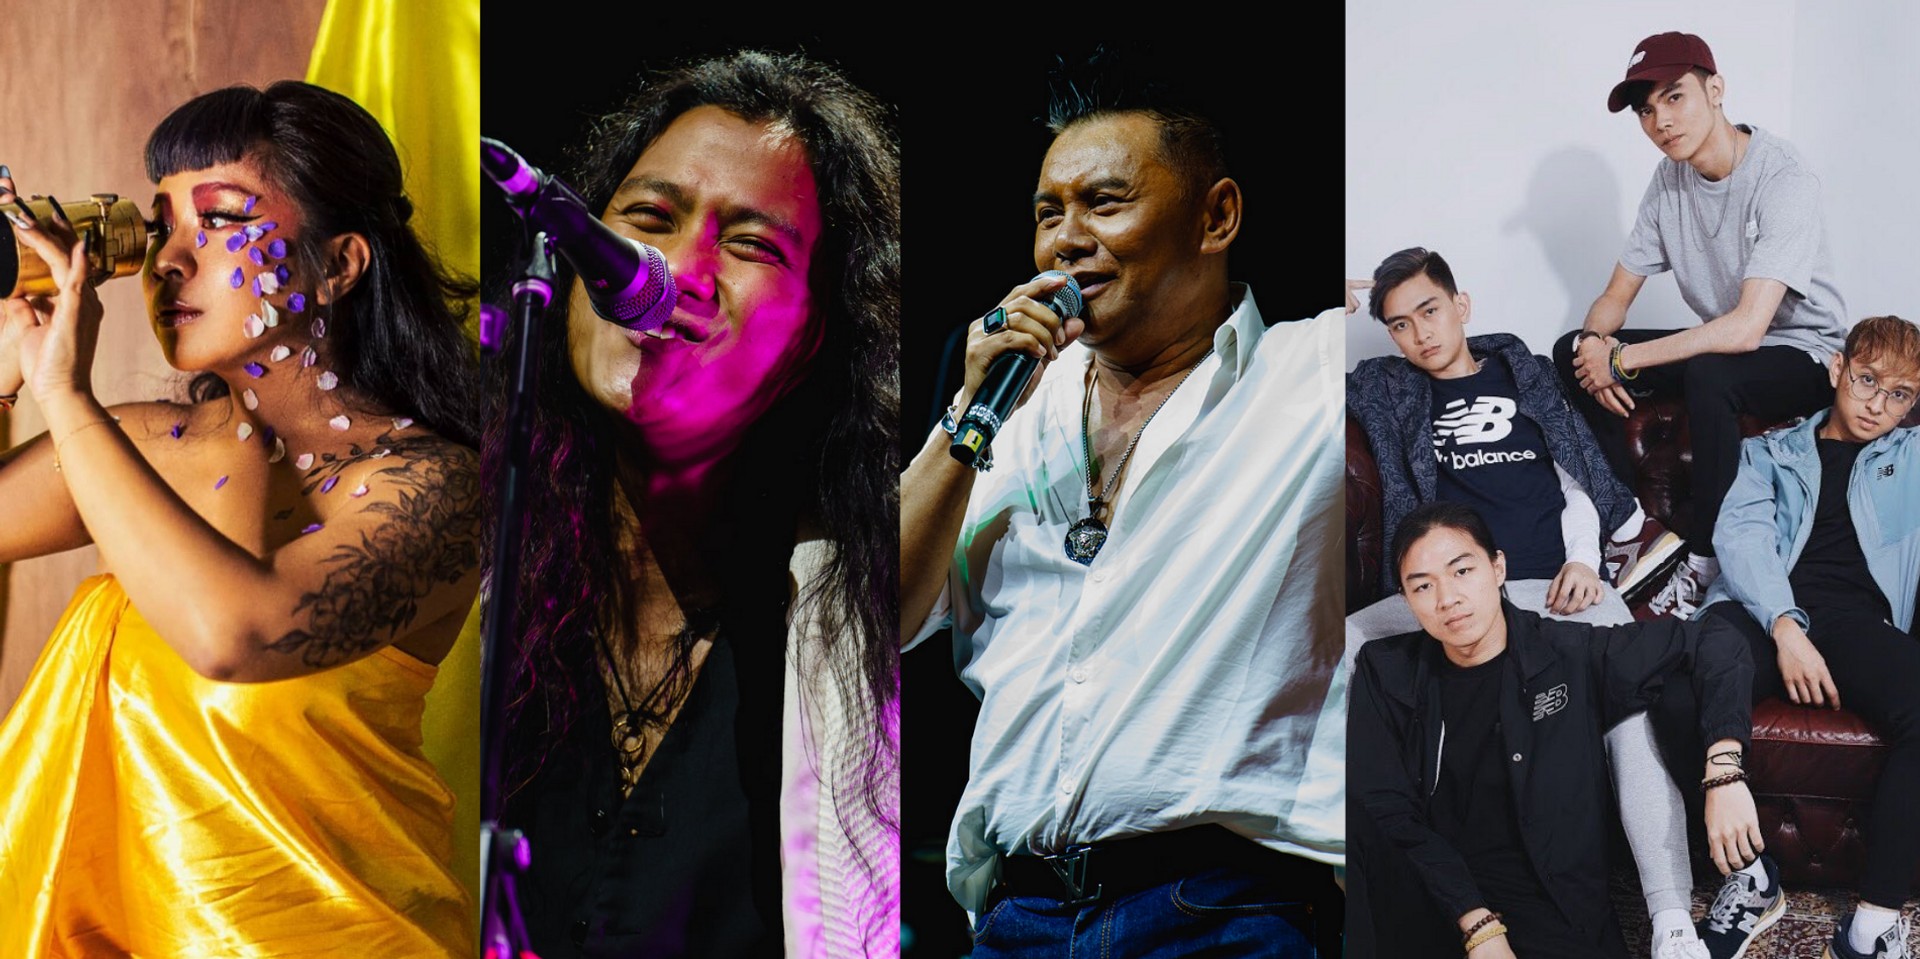 Zee Avi, Zainal Abidin, Muzza, and Insomniacks to perform at Live4Malaysia concert series this August and September